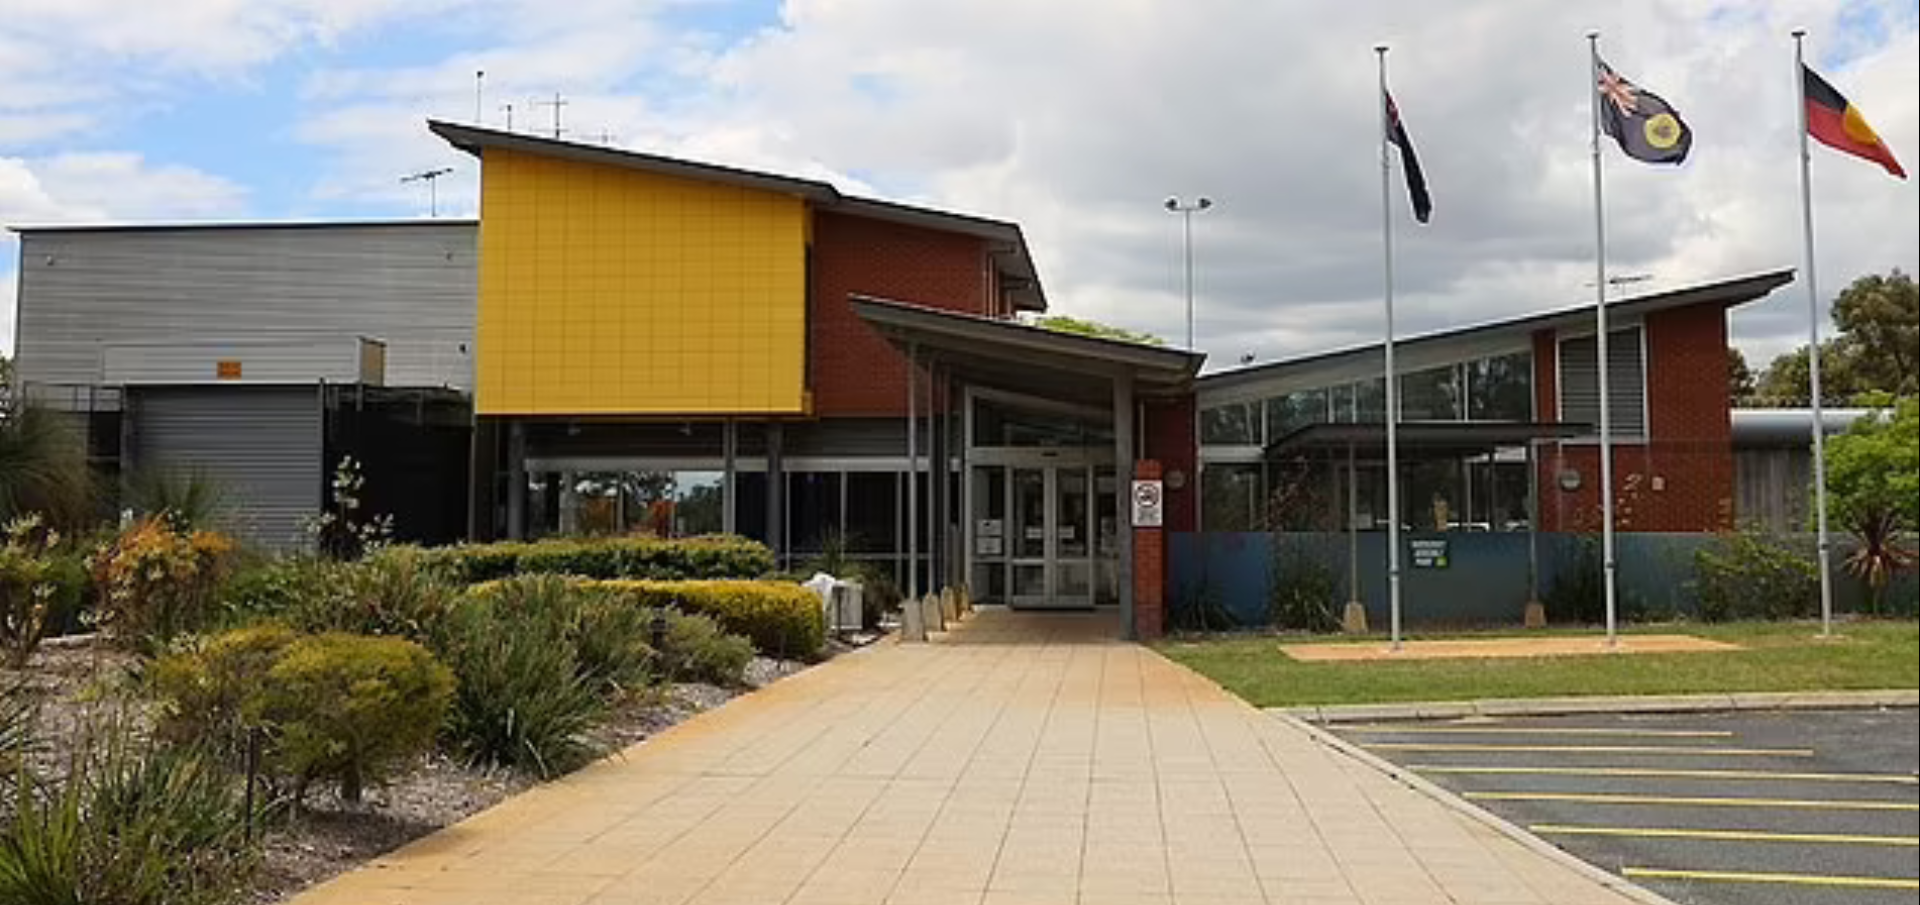 Authorities claim the boys caused extensive damage to Banksia Hill detention centre (pictured) and were proving uncontrollable in its confines. Credit: Department of Justice